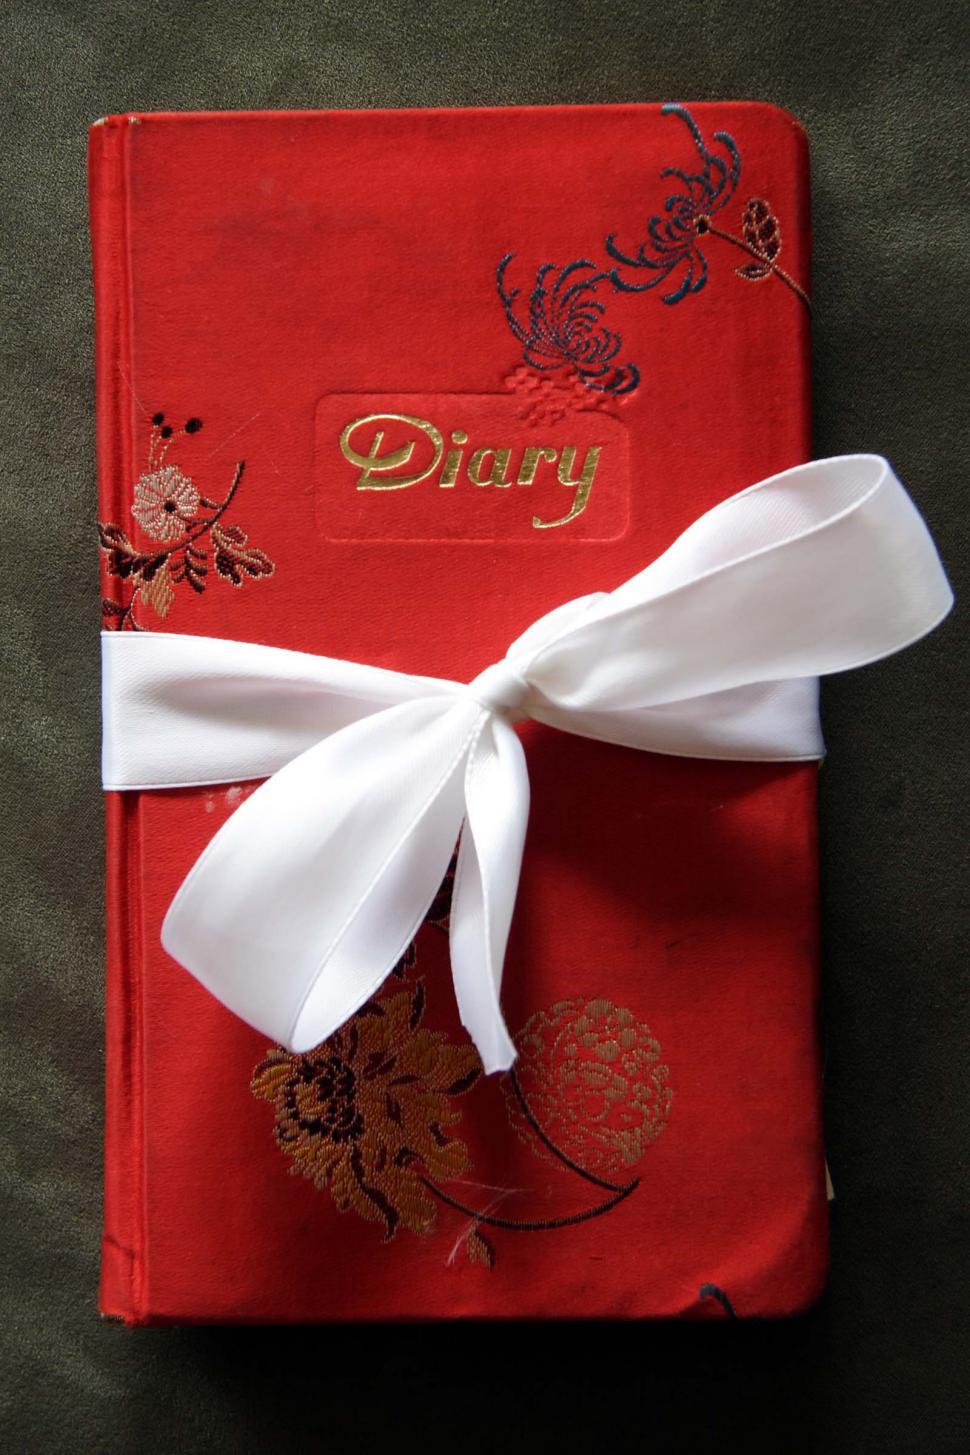 Free Image of Red Diary Book with White Bow 